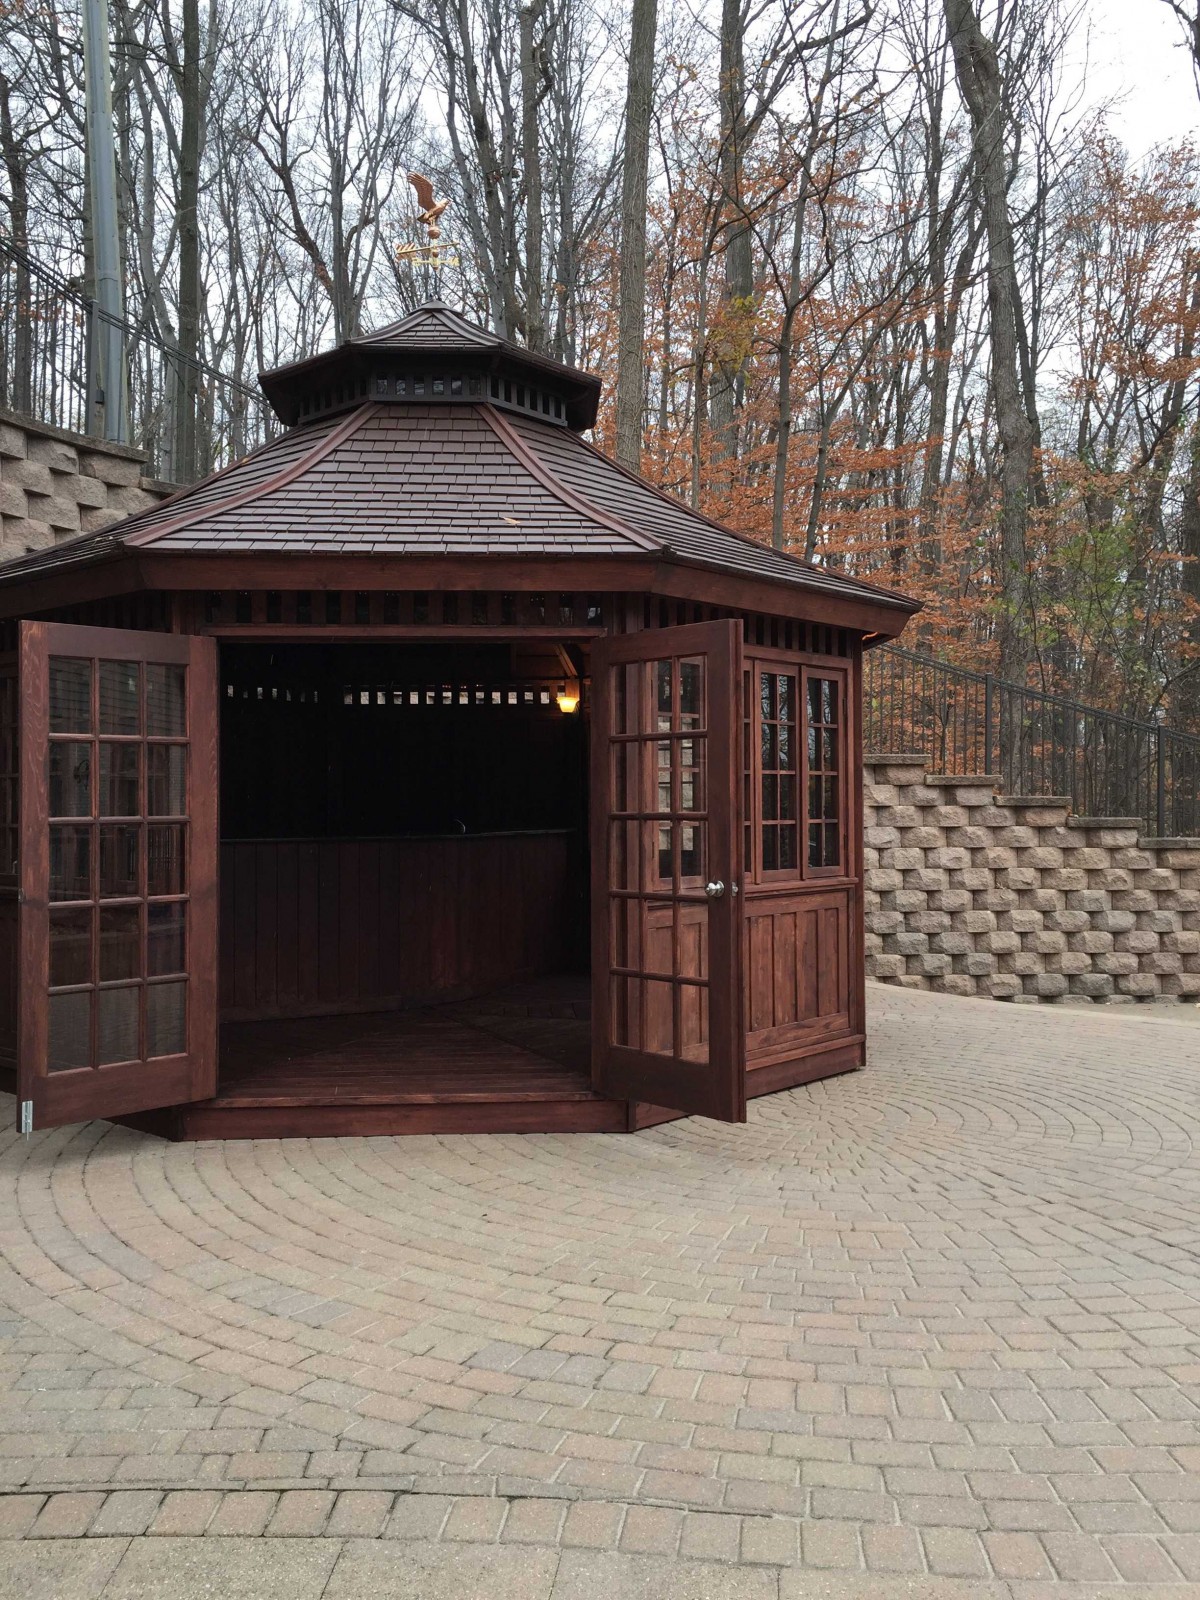 San cristobal gazebo design 16' before woods with weathervanes seen from front.ID number 3133-4.